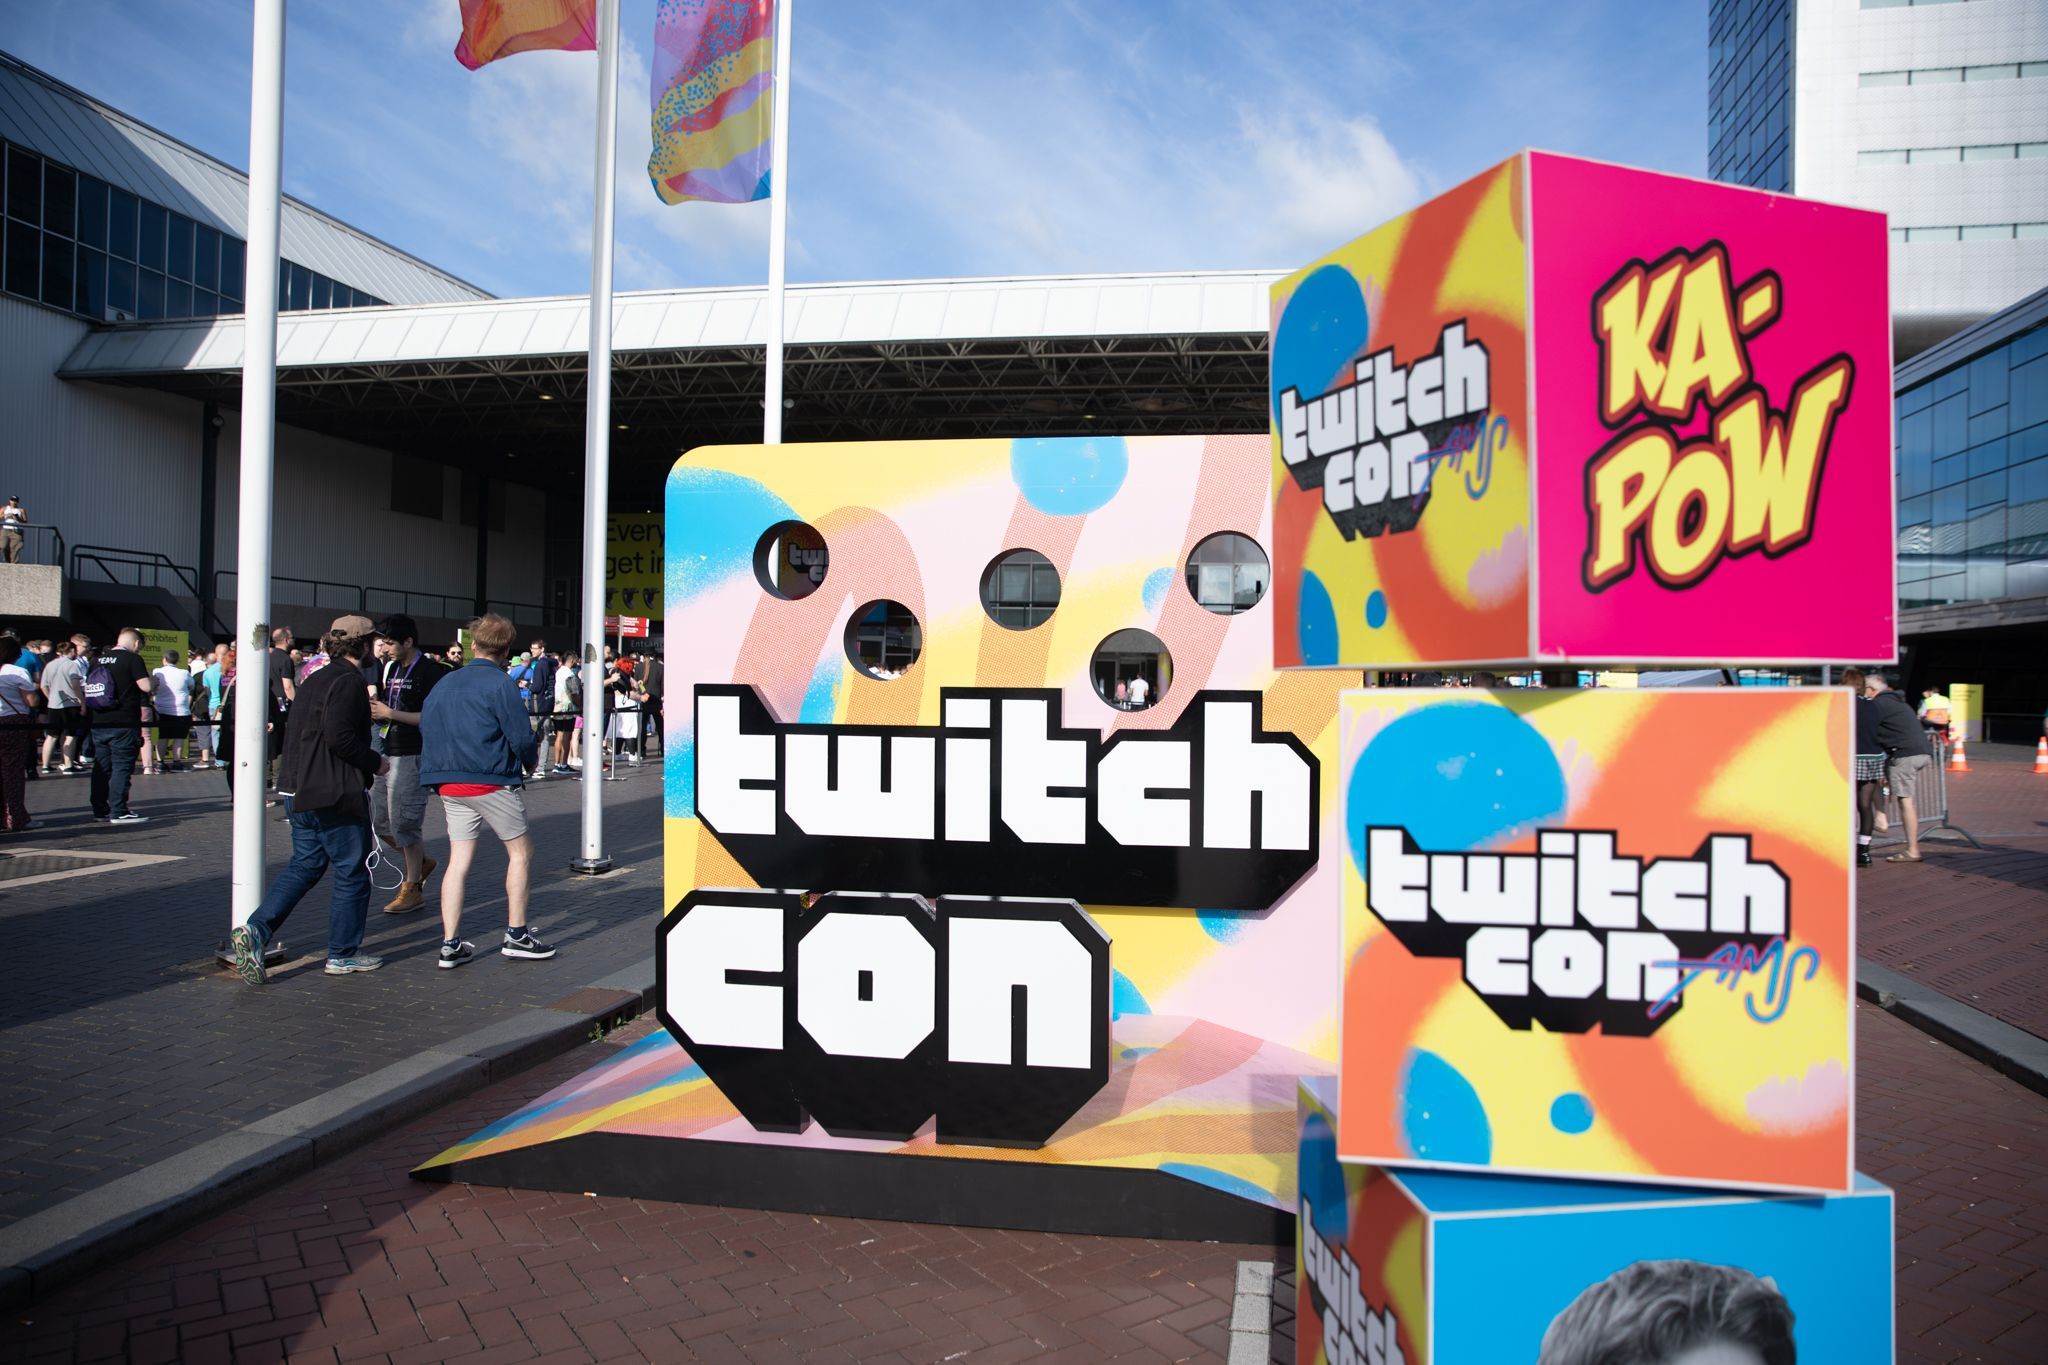 TwitchCon will take place in Paris on July 8 and 9, 2023 at the Porte de Versailles exhibition center